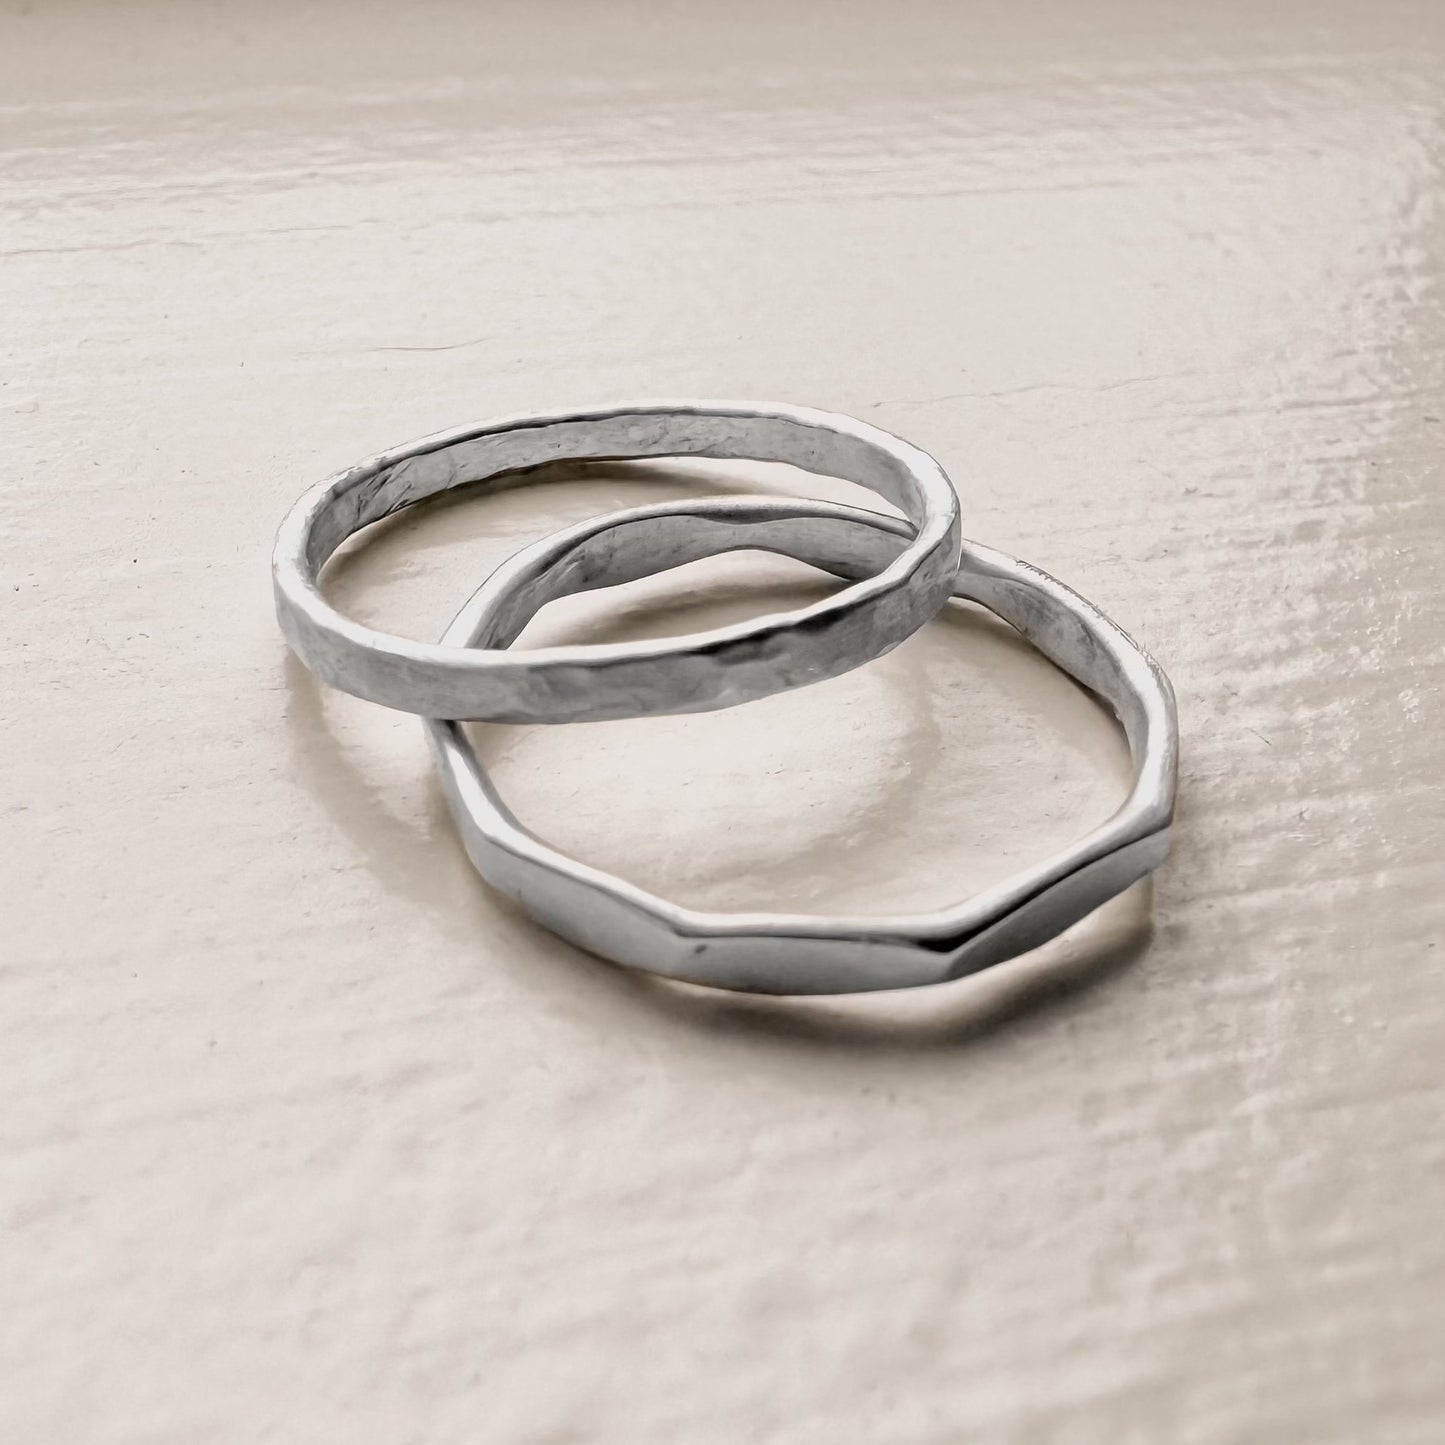 Sterling Silver Hammered and Scalloped Stackable Rings - Handmade in Hawaii